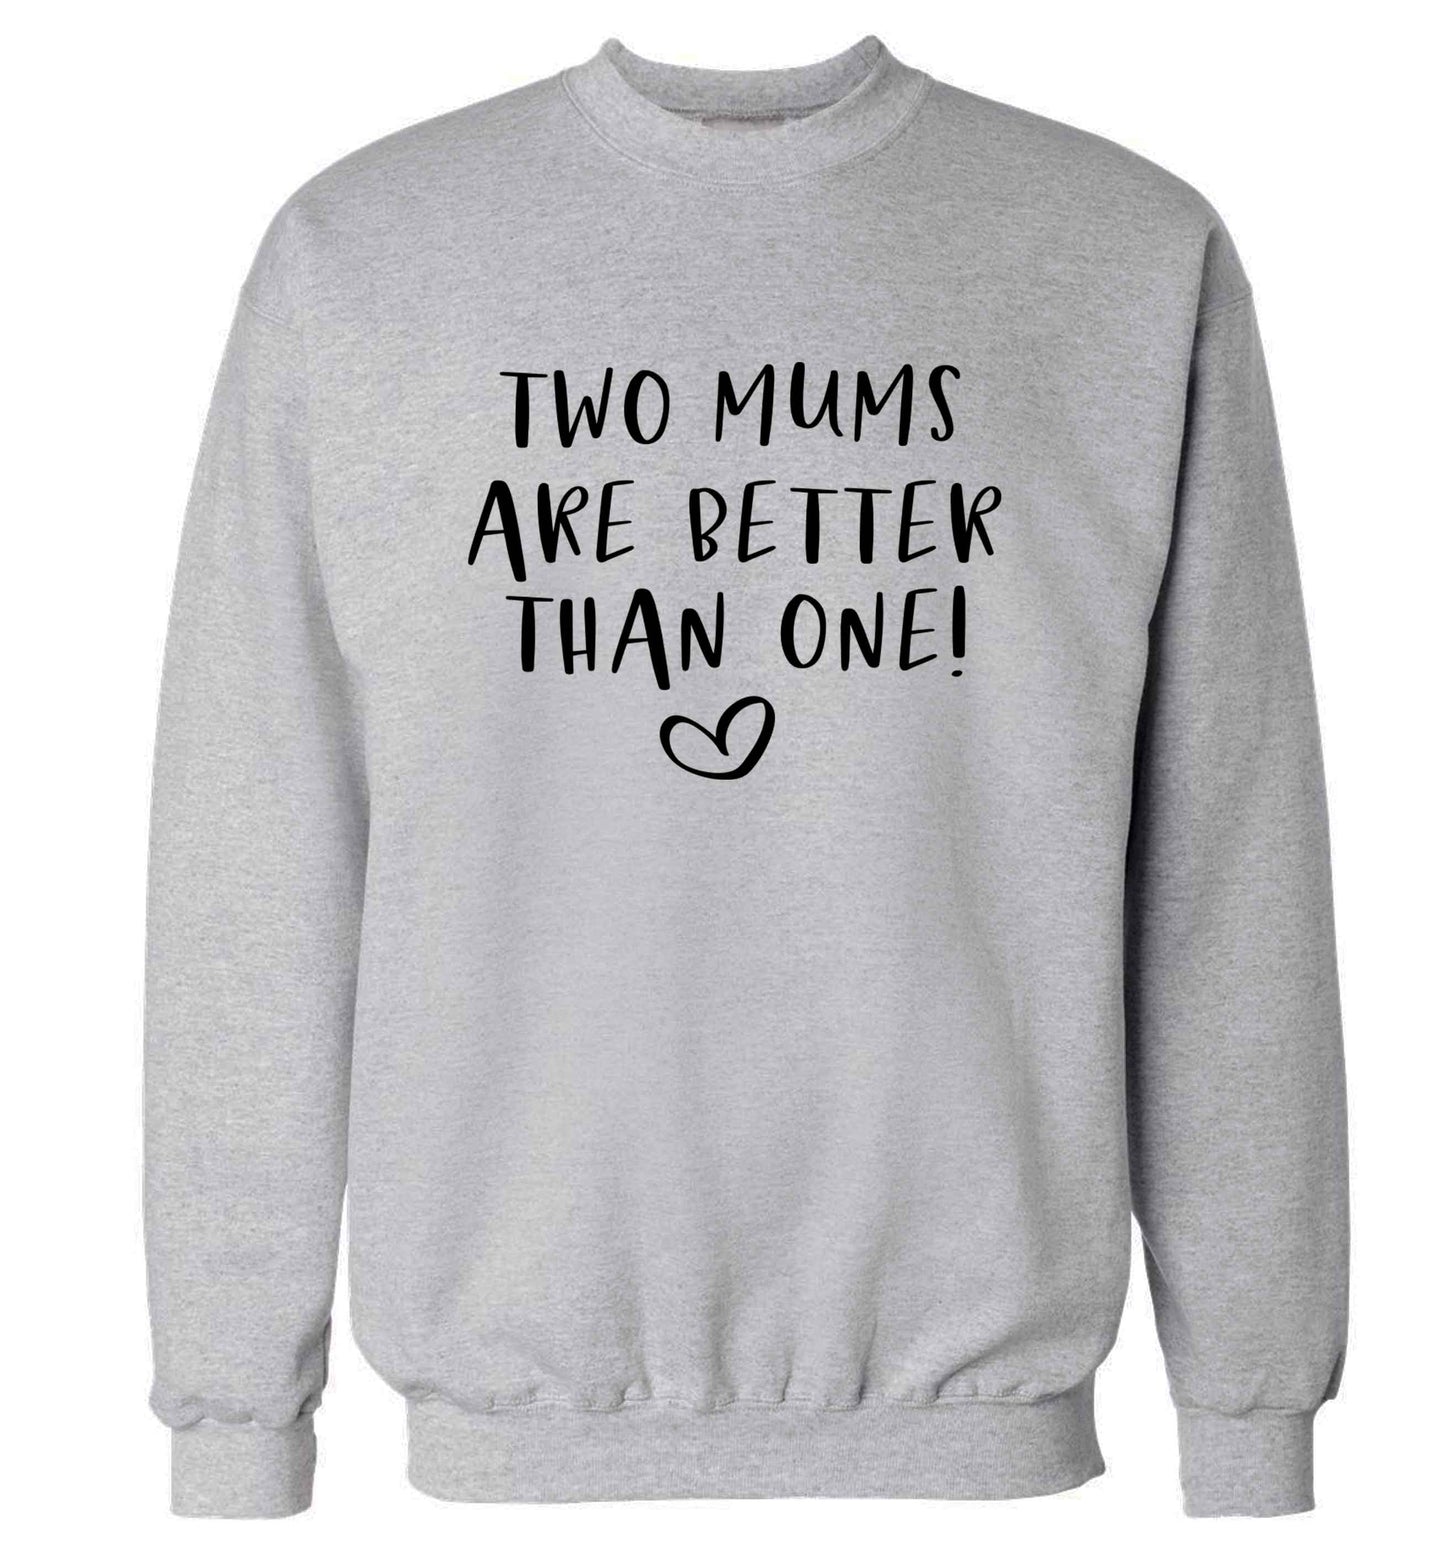 Two mums are better than one adult's unisex grey sweater 2XL